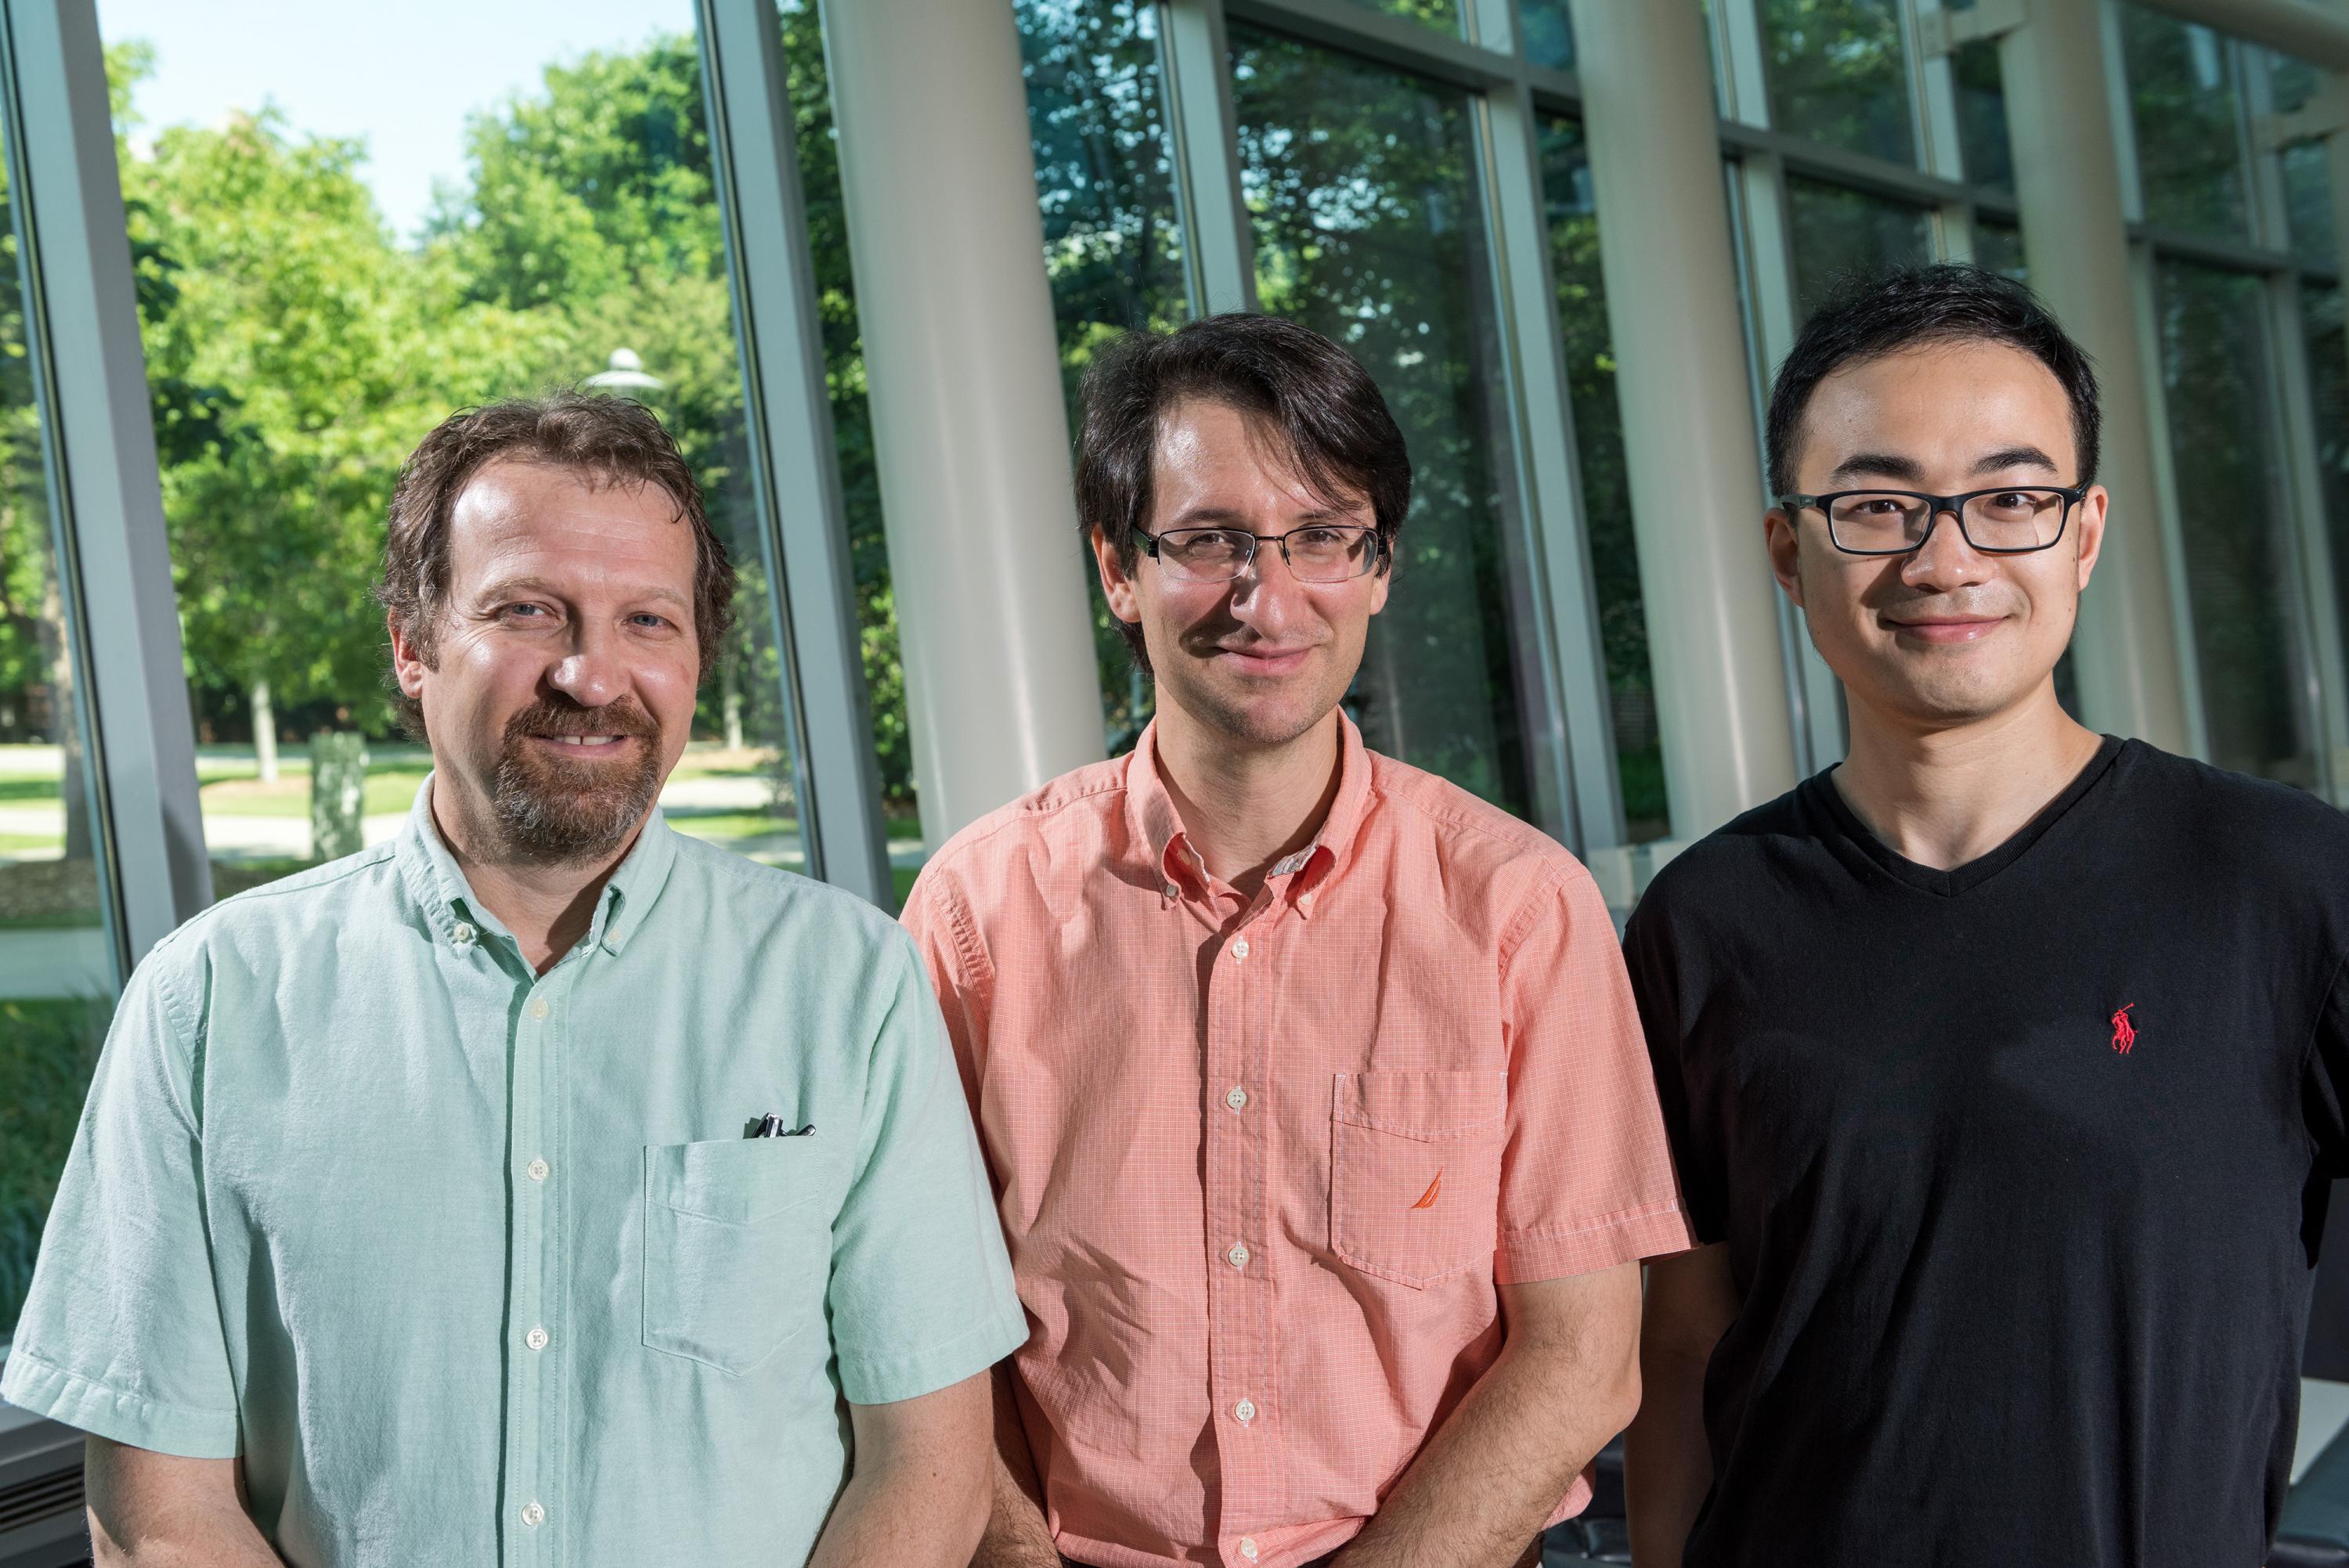 Rodney Weber, a professor in Georgia Tech’s School of Earth &amp; Atmospheric Sciences, Athanasios Nenes, a professor and Georgia Power Scholar in the School of Earth &amp; Atmospheric Sciences and the School of Chemical &amp; Biomolecular Engineering, and Yuzhong Zhang, a postdoctoral researcher. (Credit: Rob Felt)